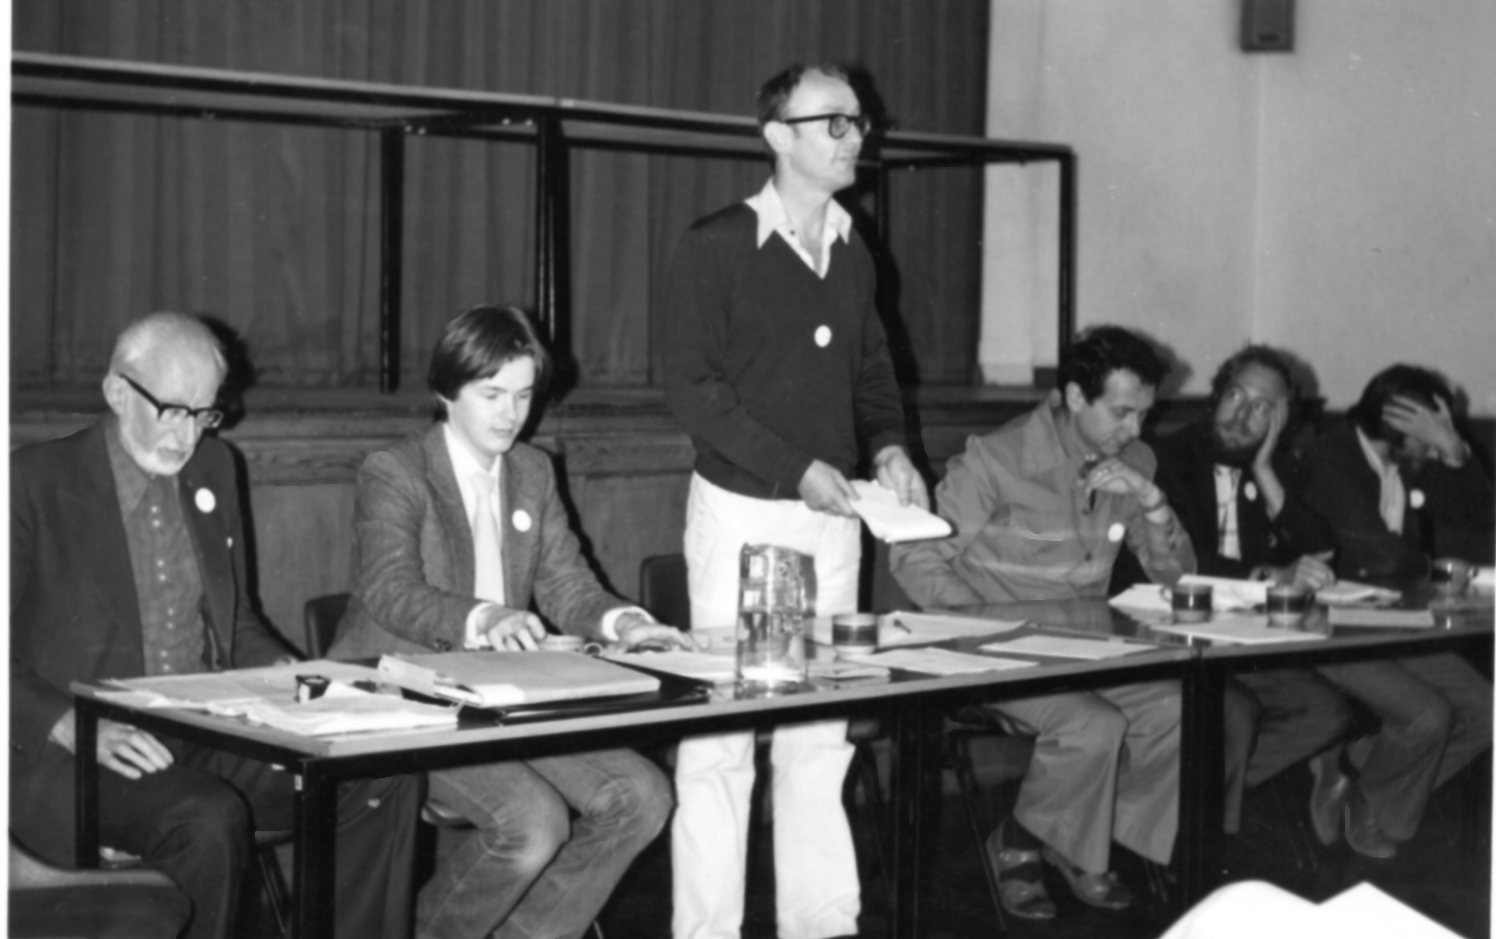 A board of trustees at a meeting, with one man standing and speaking